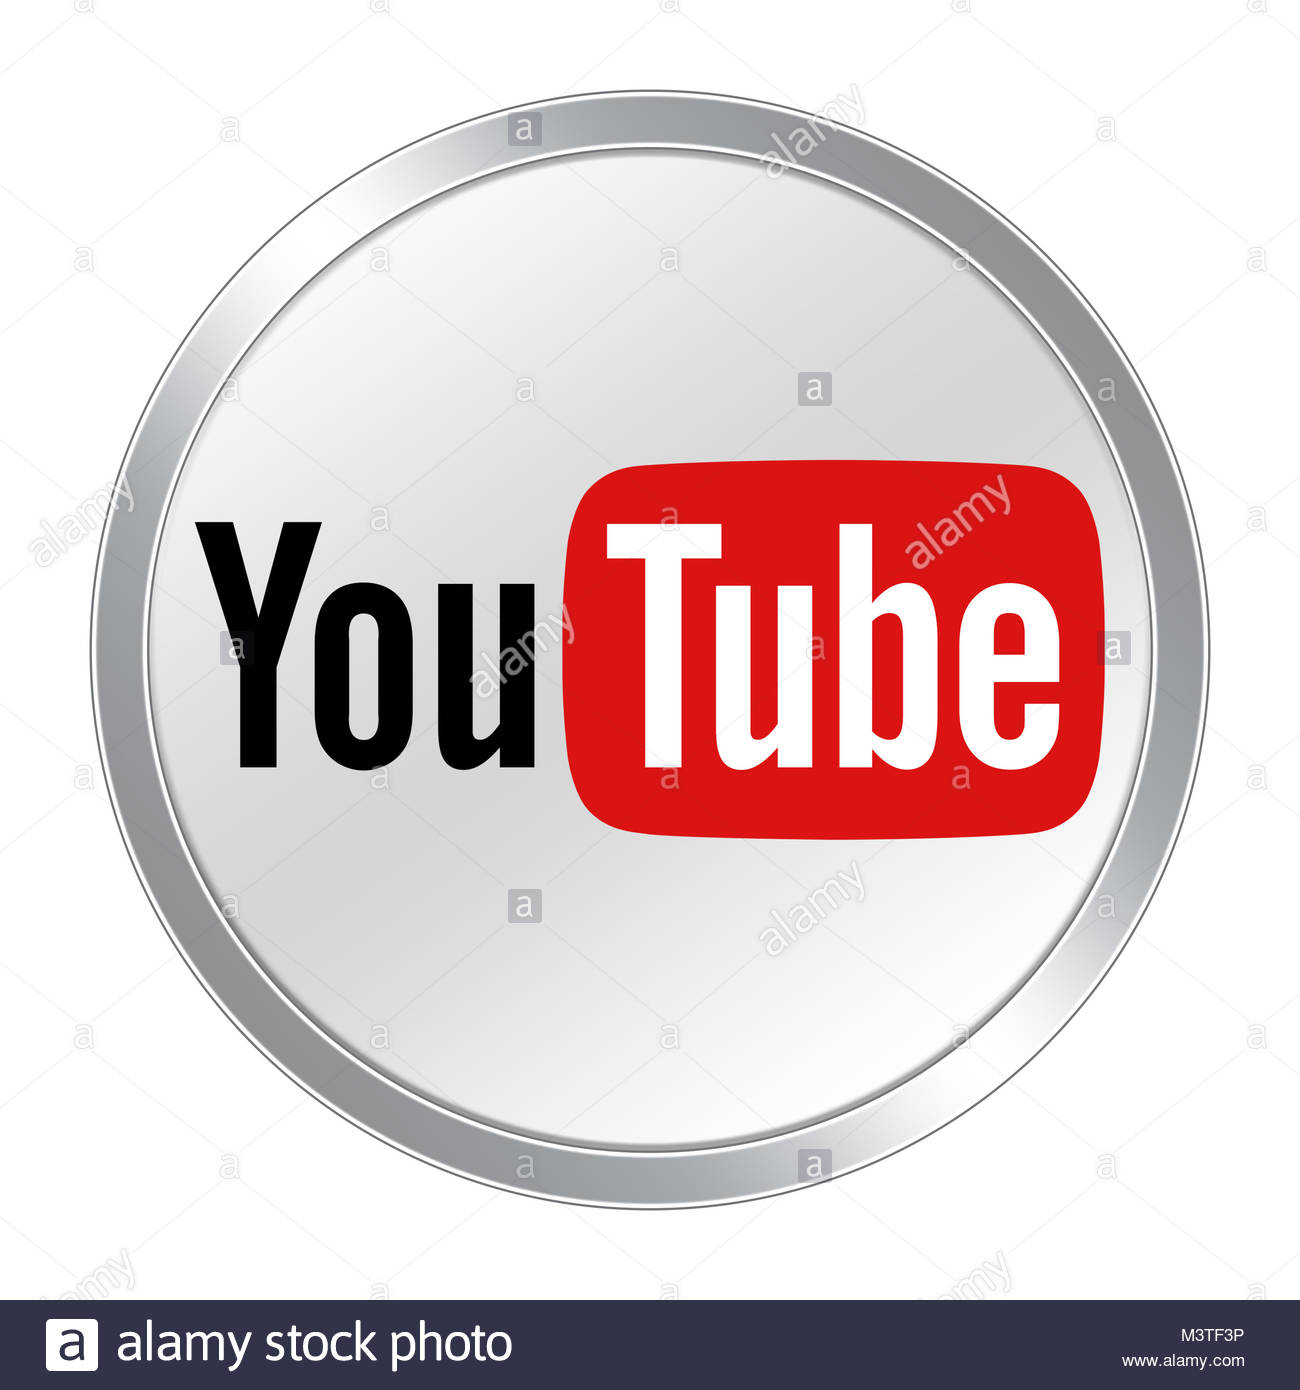 Image result for youtube logo button